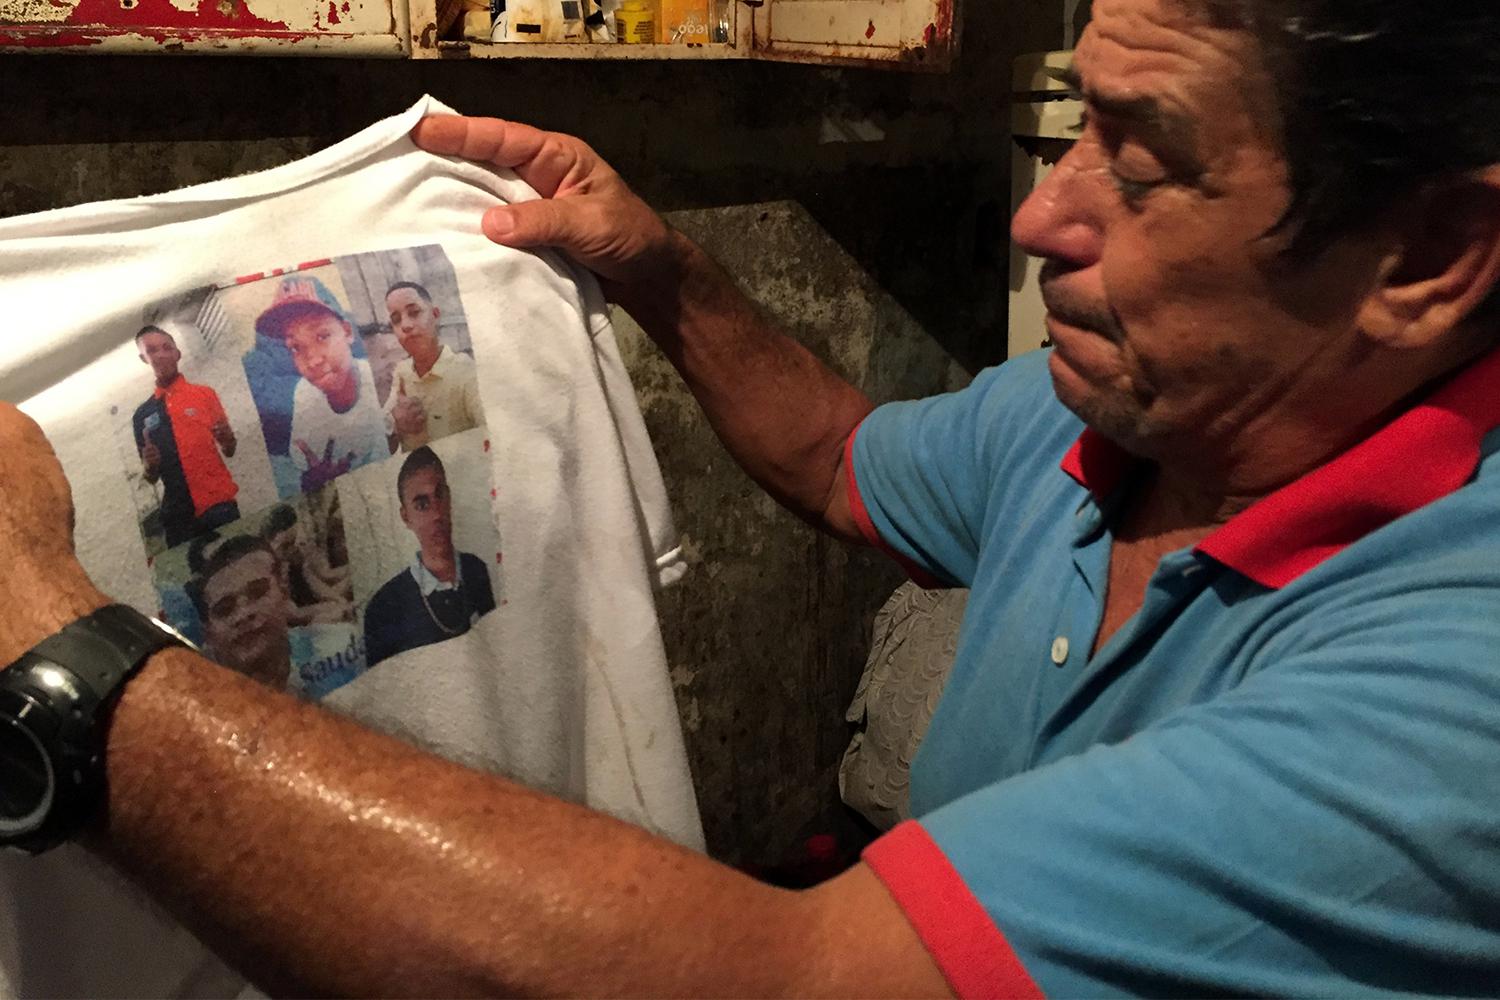 Jorge Augusto Vieira cries when he looks at a t-shirt with the pictures of five friends killed by police on November 28, 2015. One of them was his stepson Cleiton Corrêa de Souza, 18.© 2016 César Muñoz Acebes/Human Rights Watch